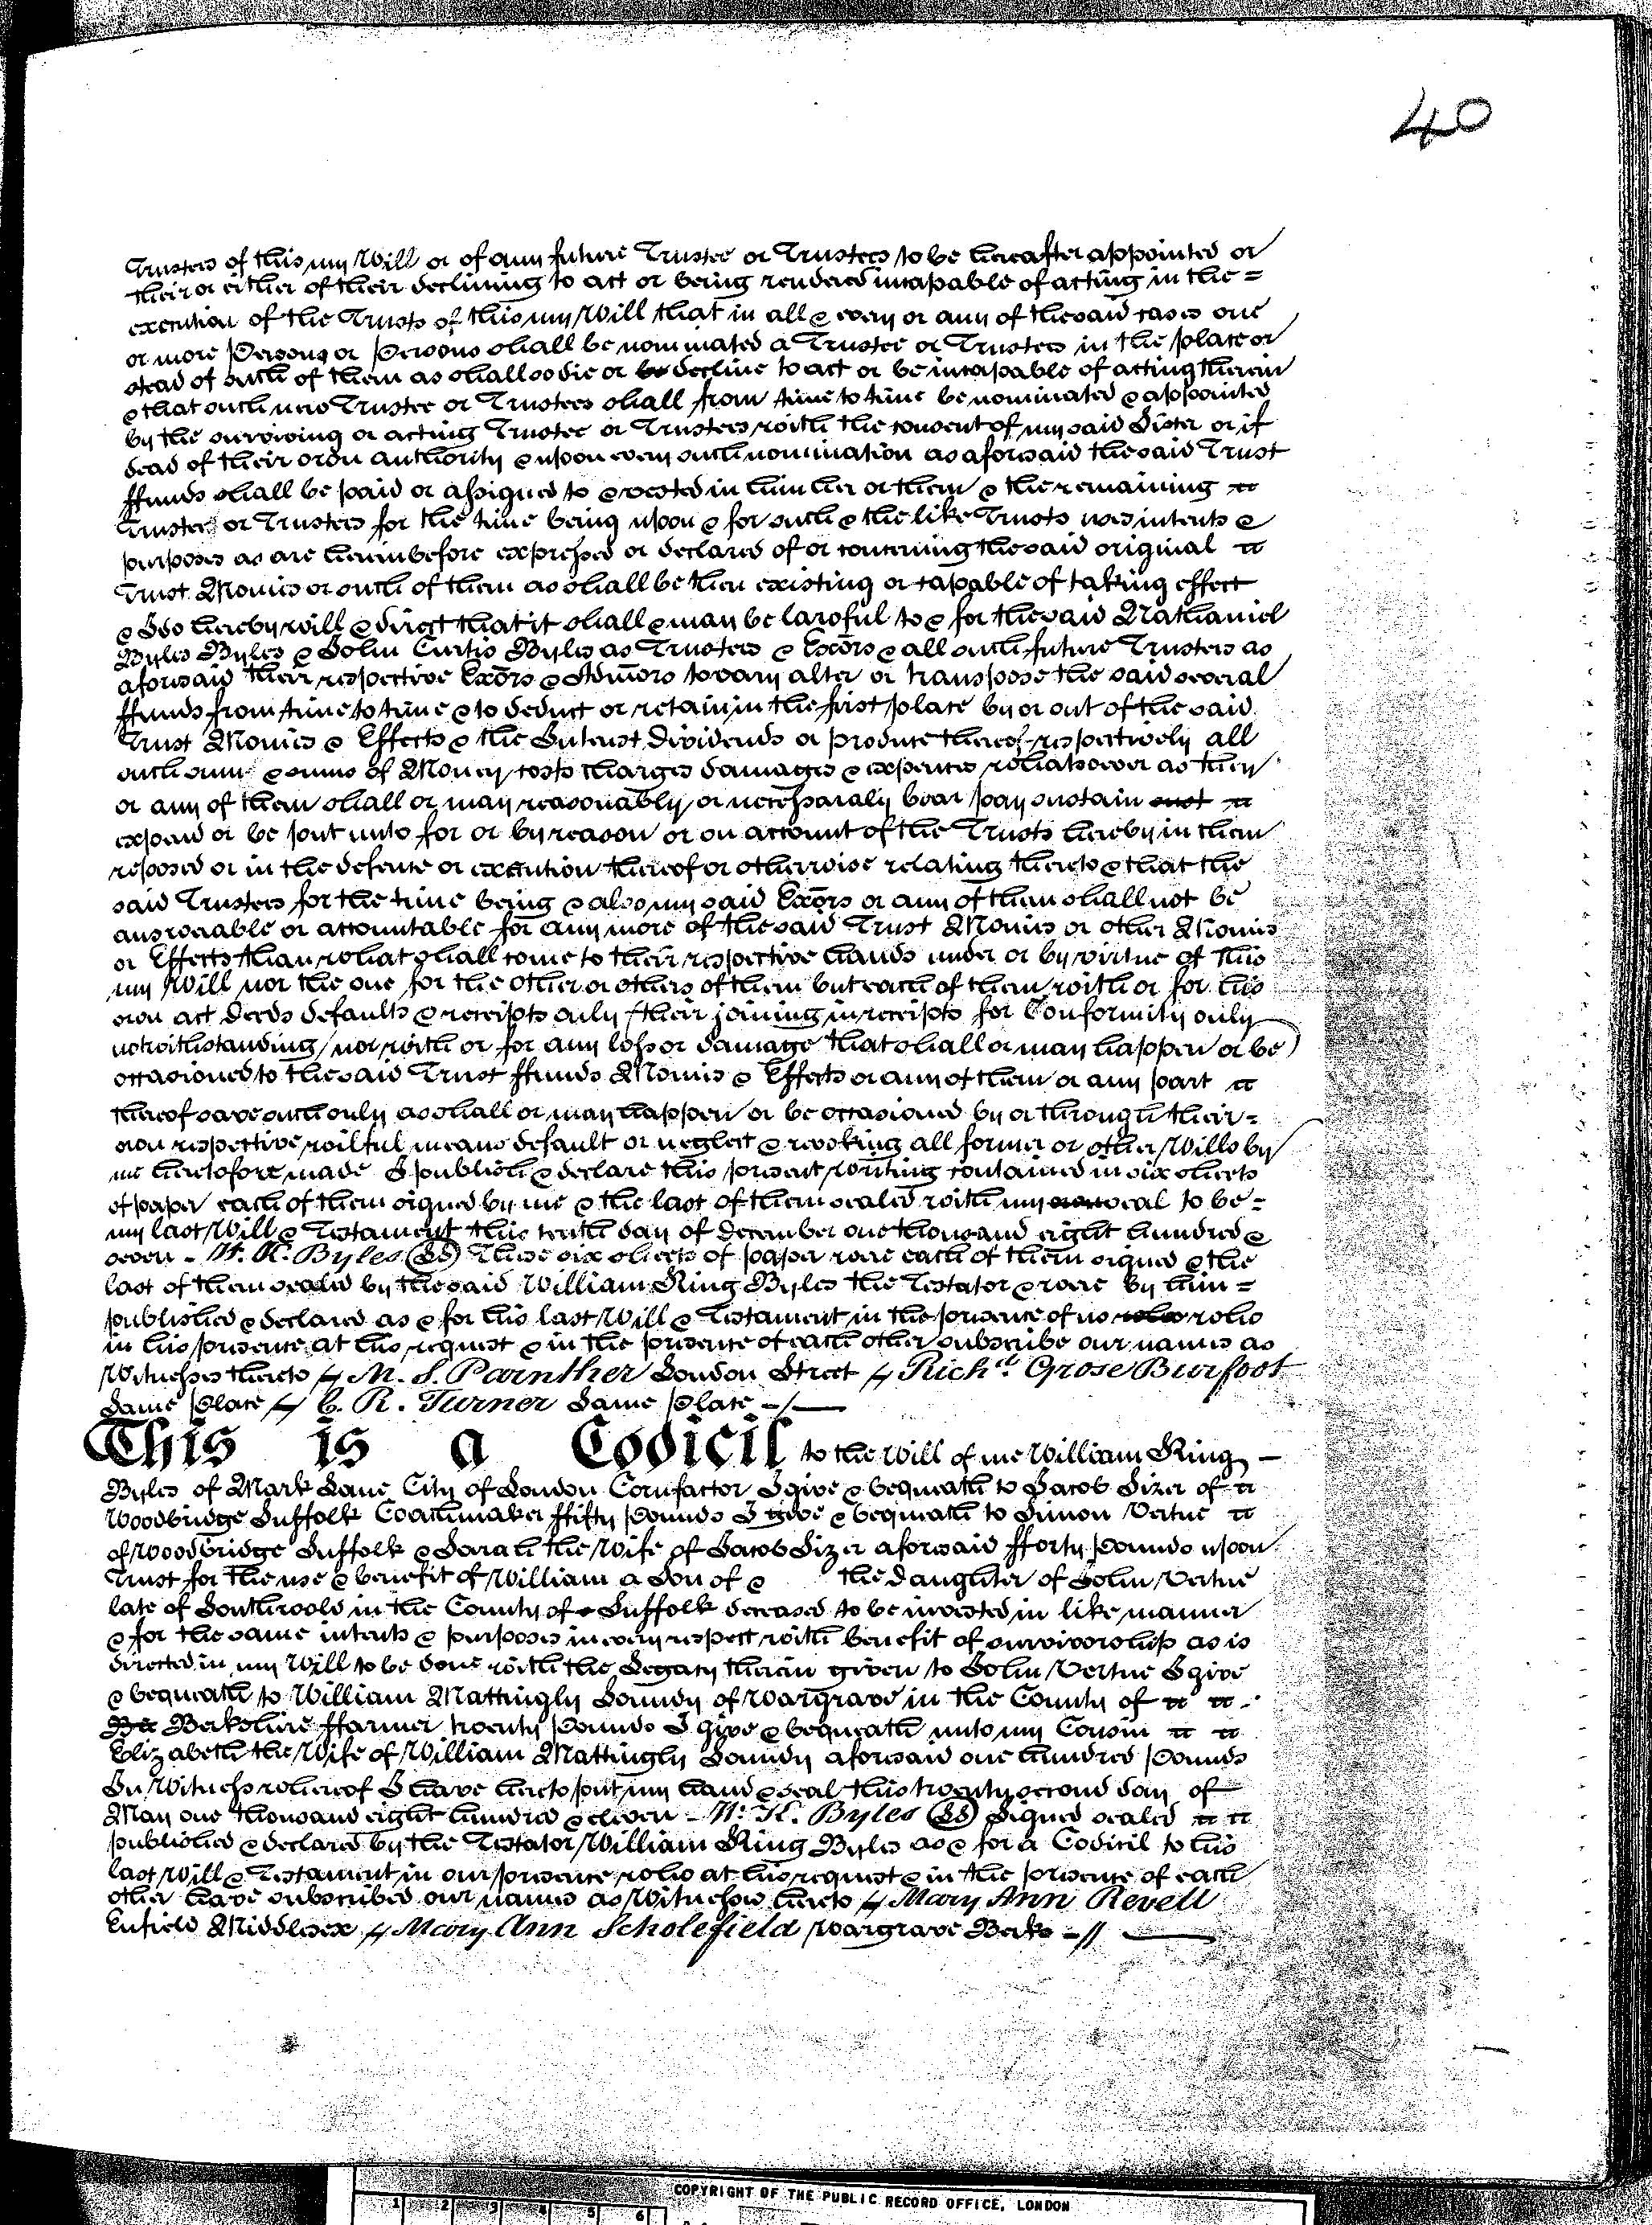 The will of William King Byles, 1811, page 4